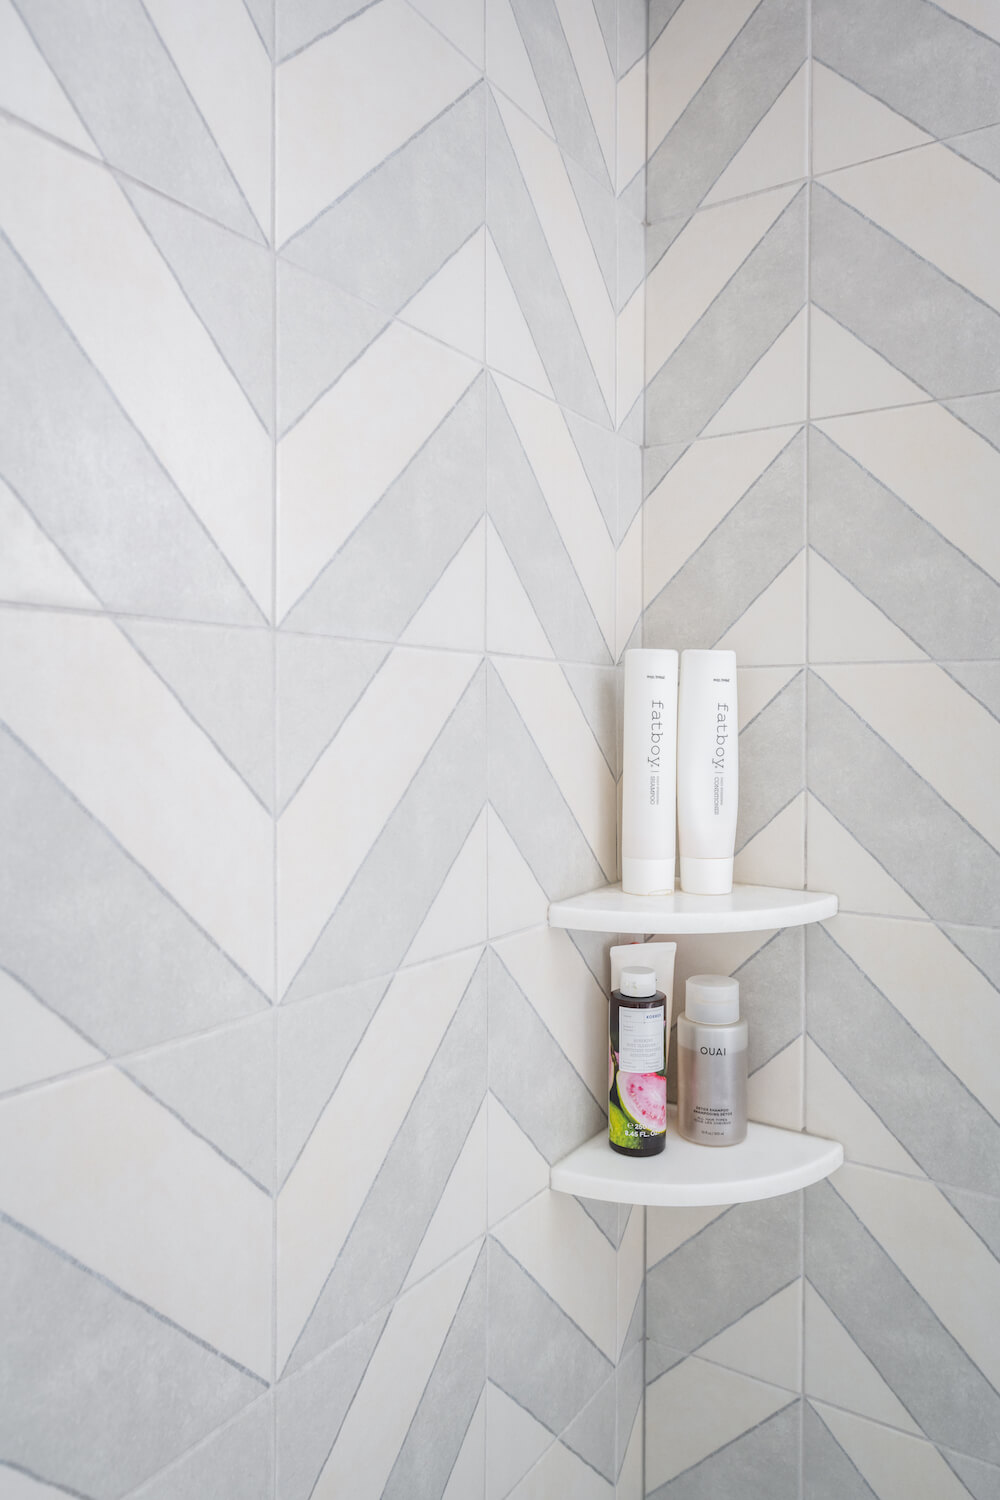 Chevron tiles in the shower with built in shelving